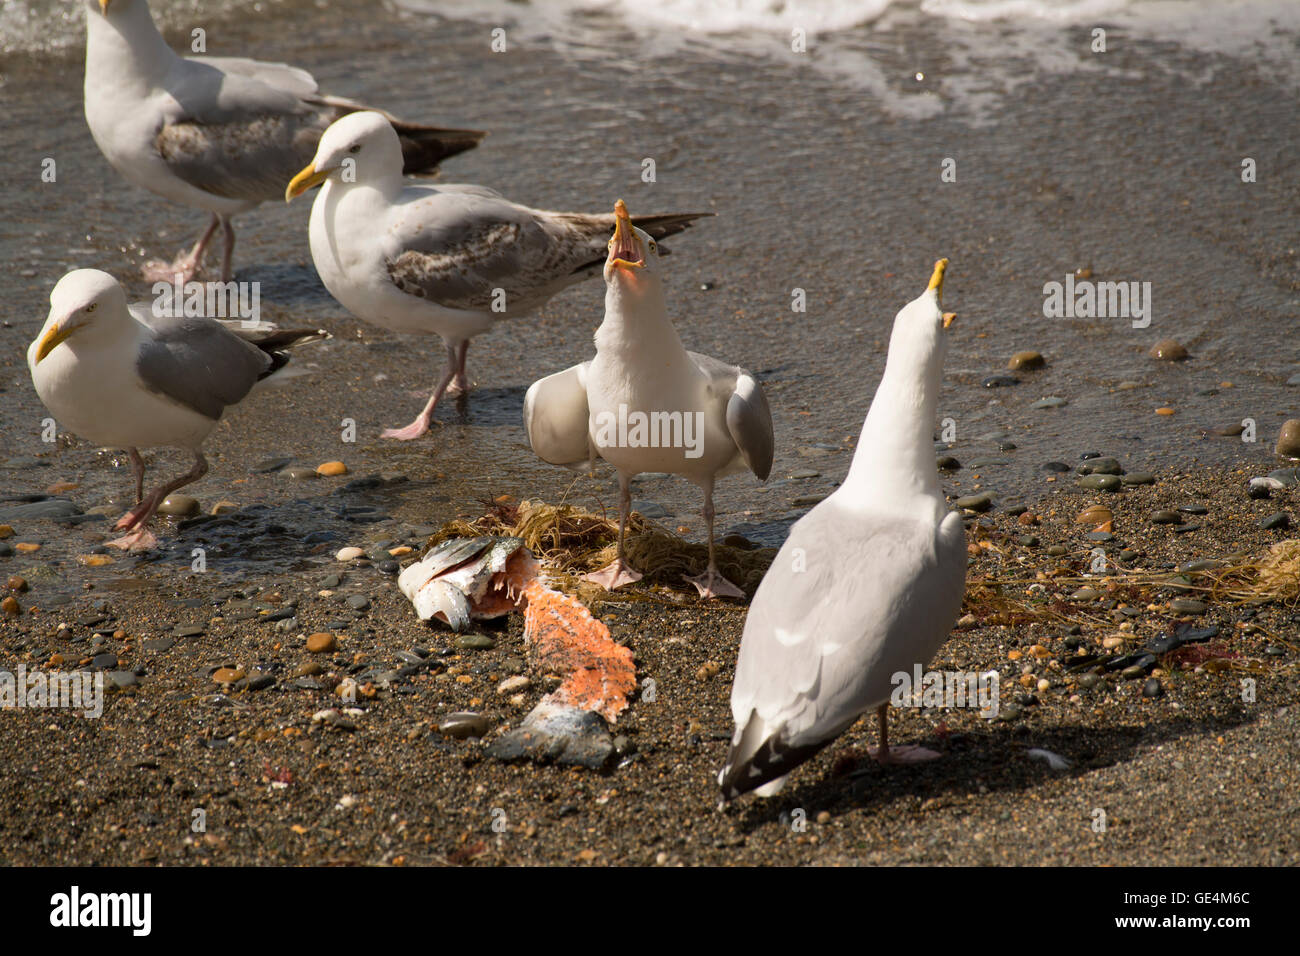 A flock of seagulls on the beach in Aberystwyth squawking  and eating  the remains of a  dead salmon, discarded on the seashore, Wales UK Stock Photo